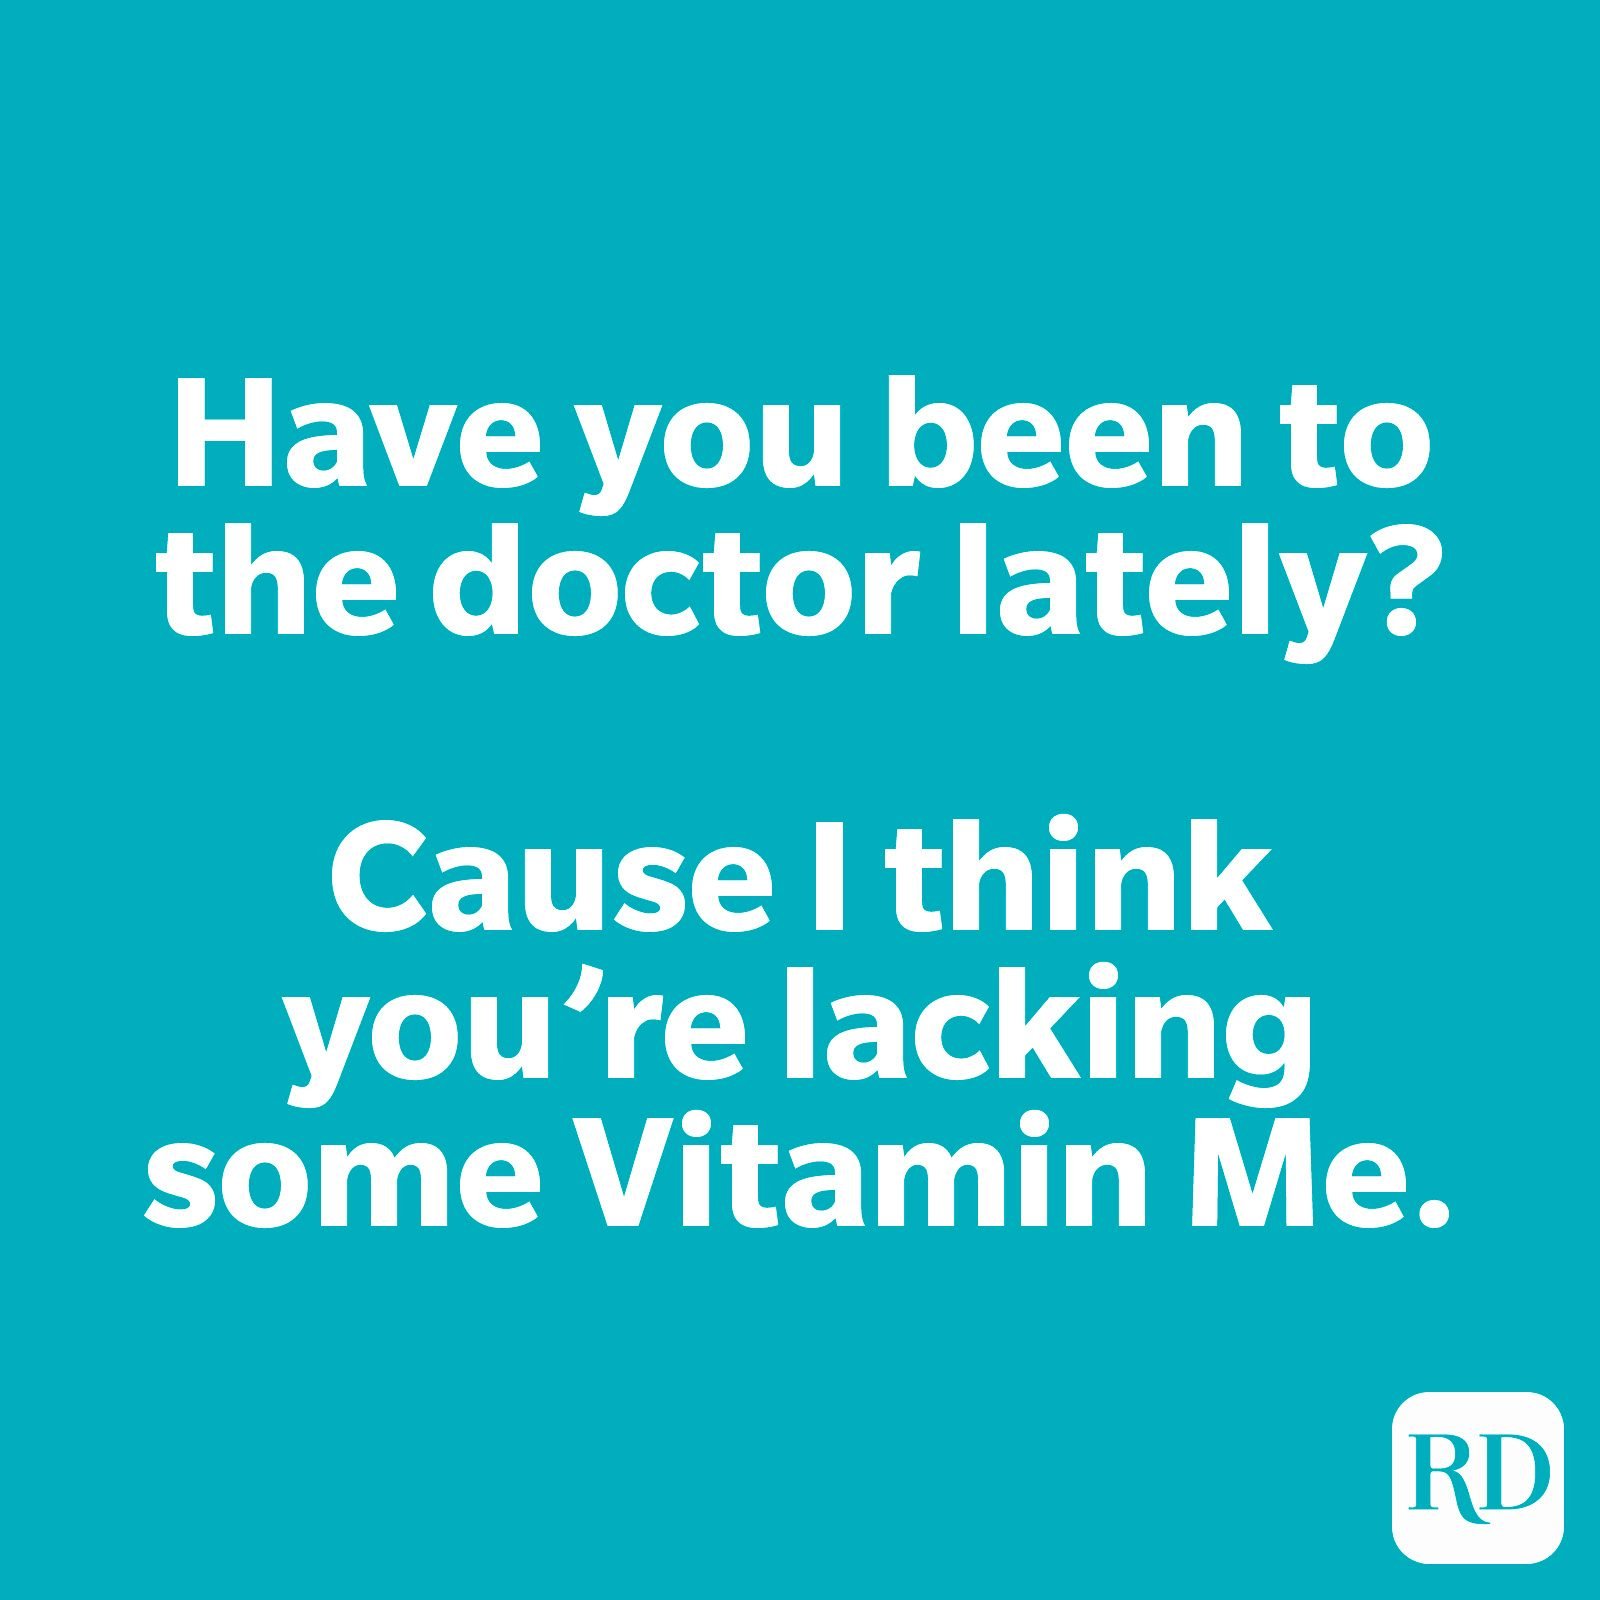 Have you been to the doctor lately? Cause I think you're lacking some Vitamin Me.